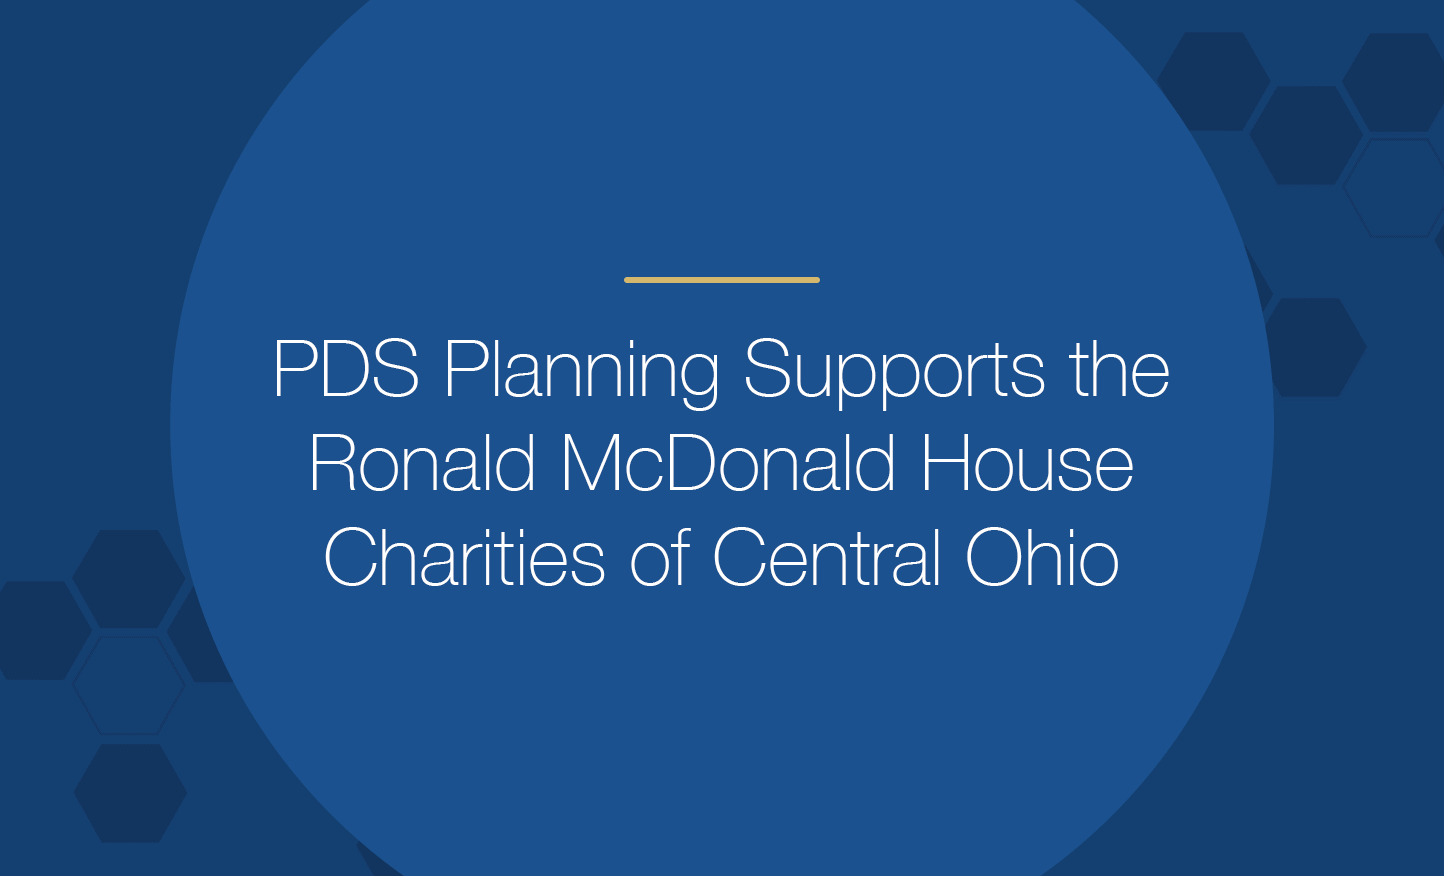 PDS Planning Supports The Ronald McDonald House Charities of Central Ohio.